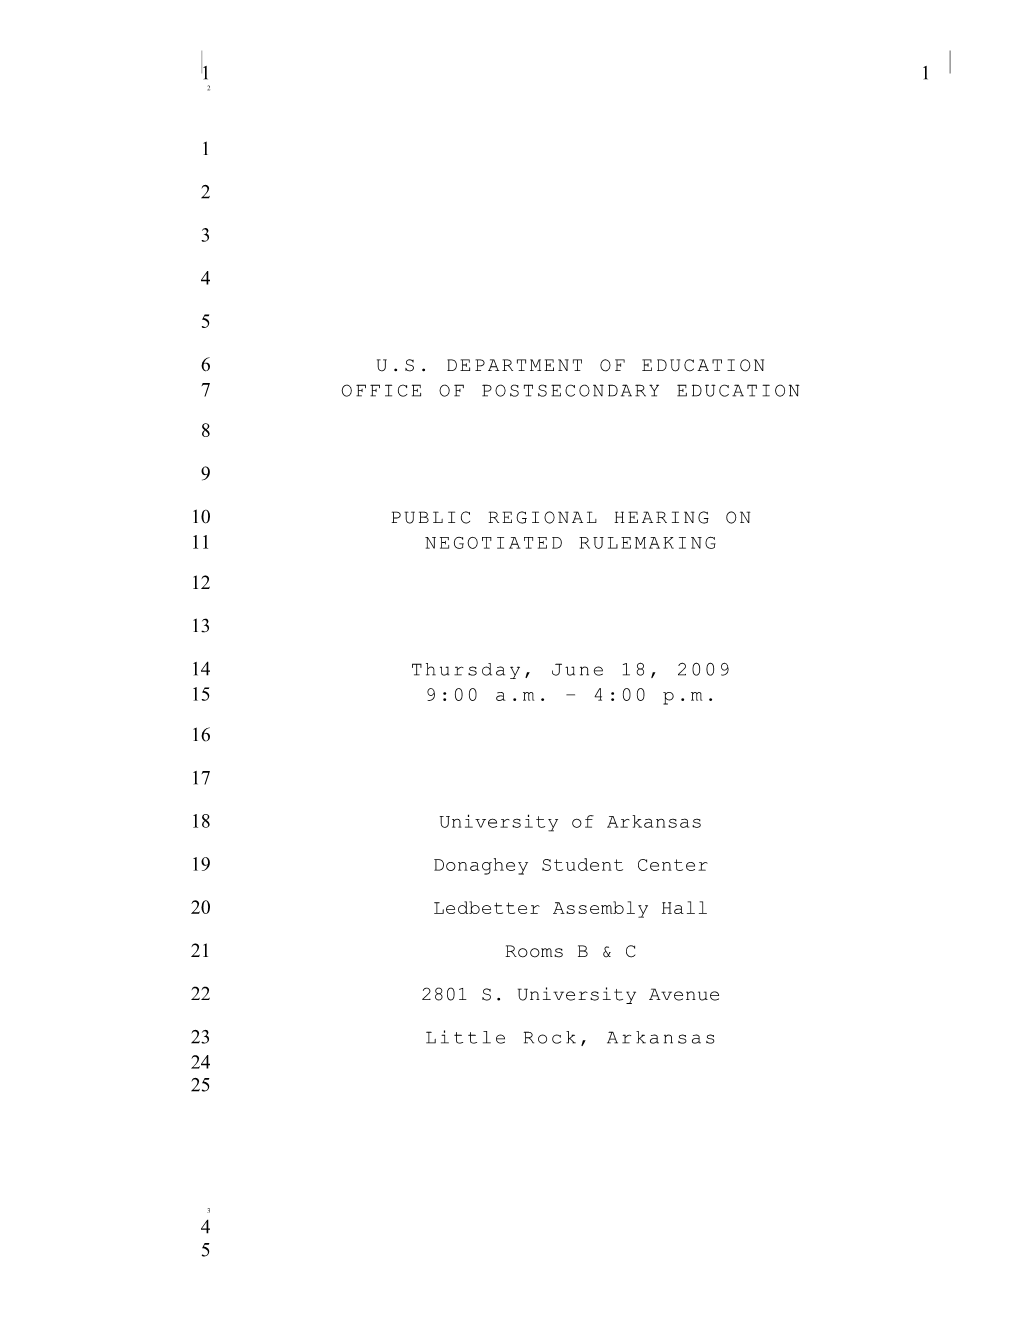 Negotiated Rulemaking for Higher Education - Transcript for the June 18, 2009 Hearing (MS Word)